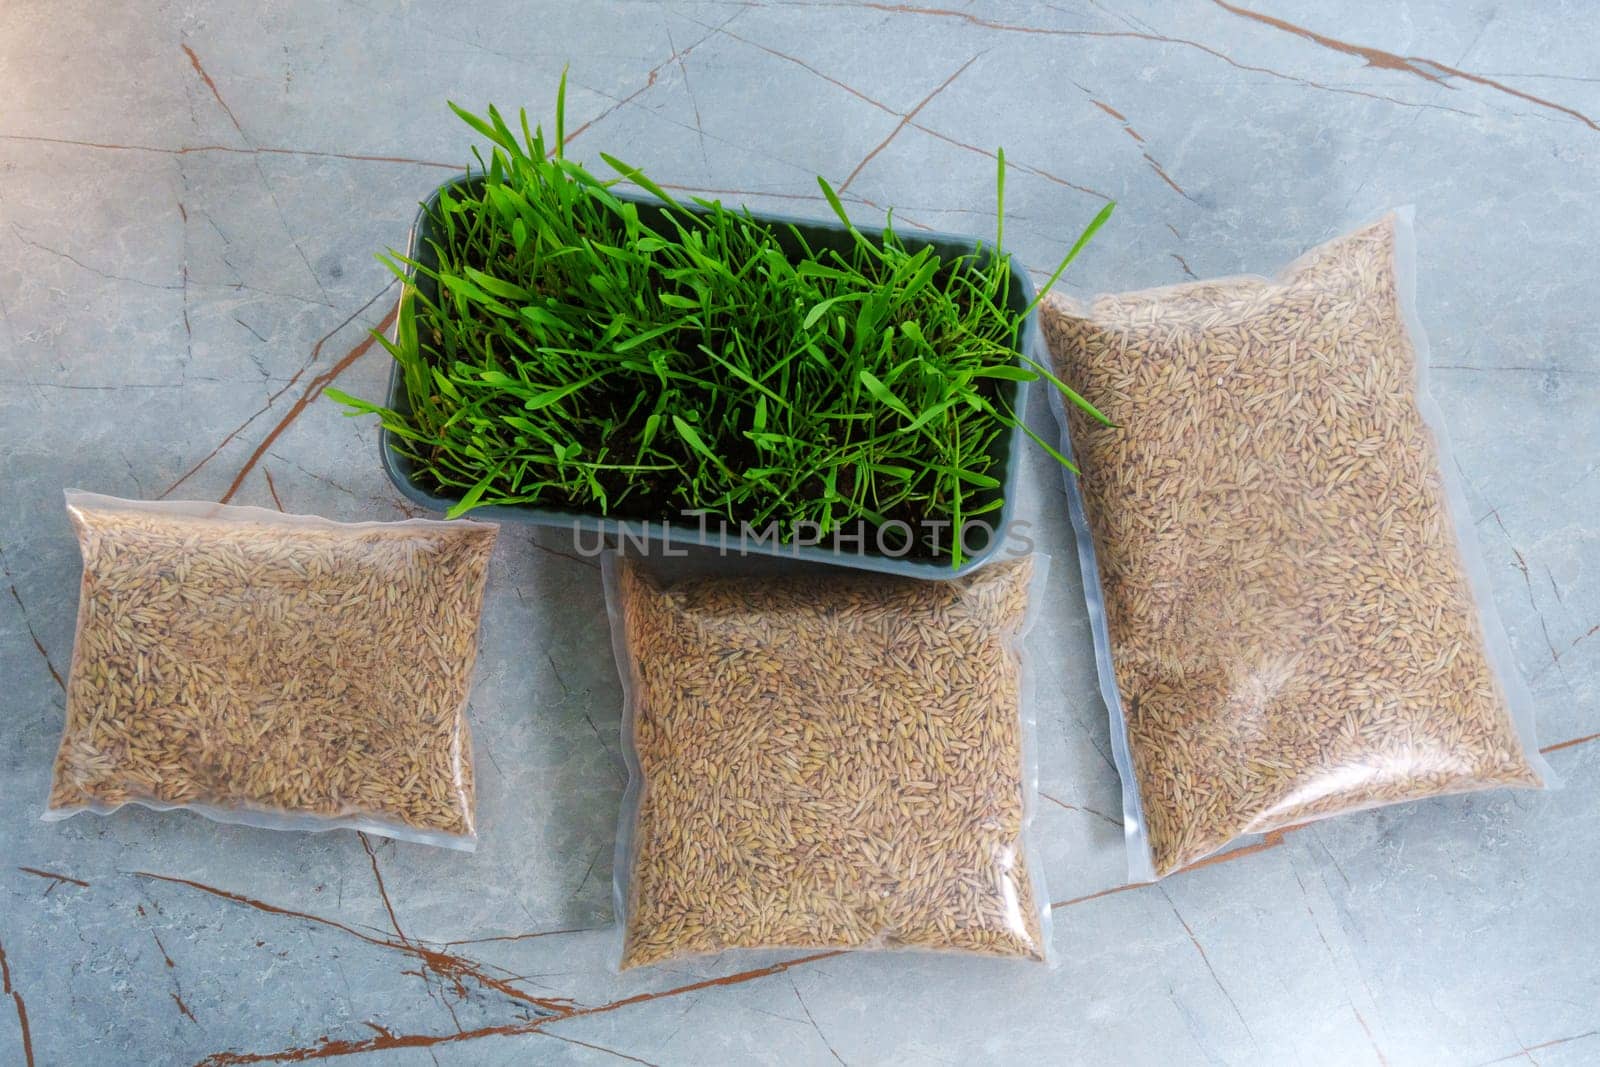 Fresh green grass, possibly intended for cats or growing microgreens. Flat lay